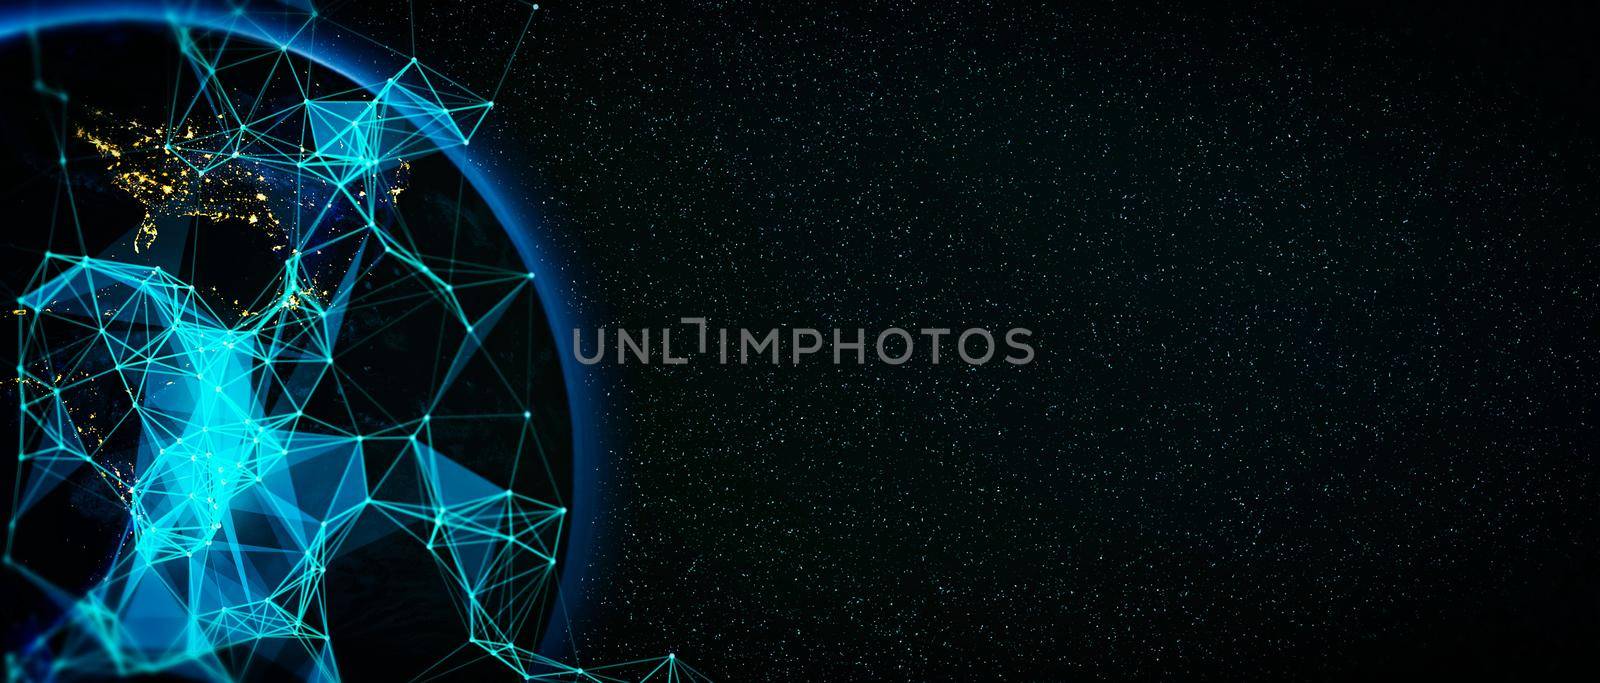 Global world network and telecommunication on earth cryptocurrency and blockchain and IoT. Elements of this image furnished by NASA by Maximusnd